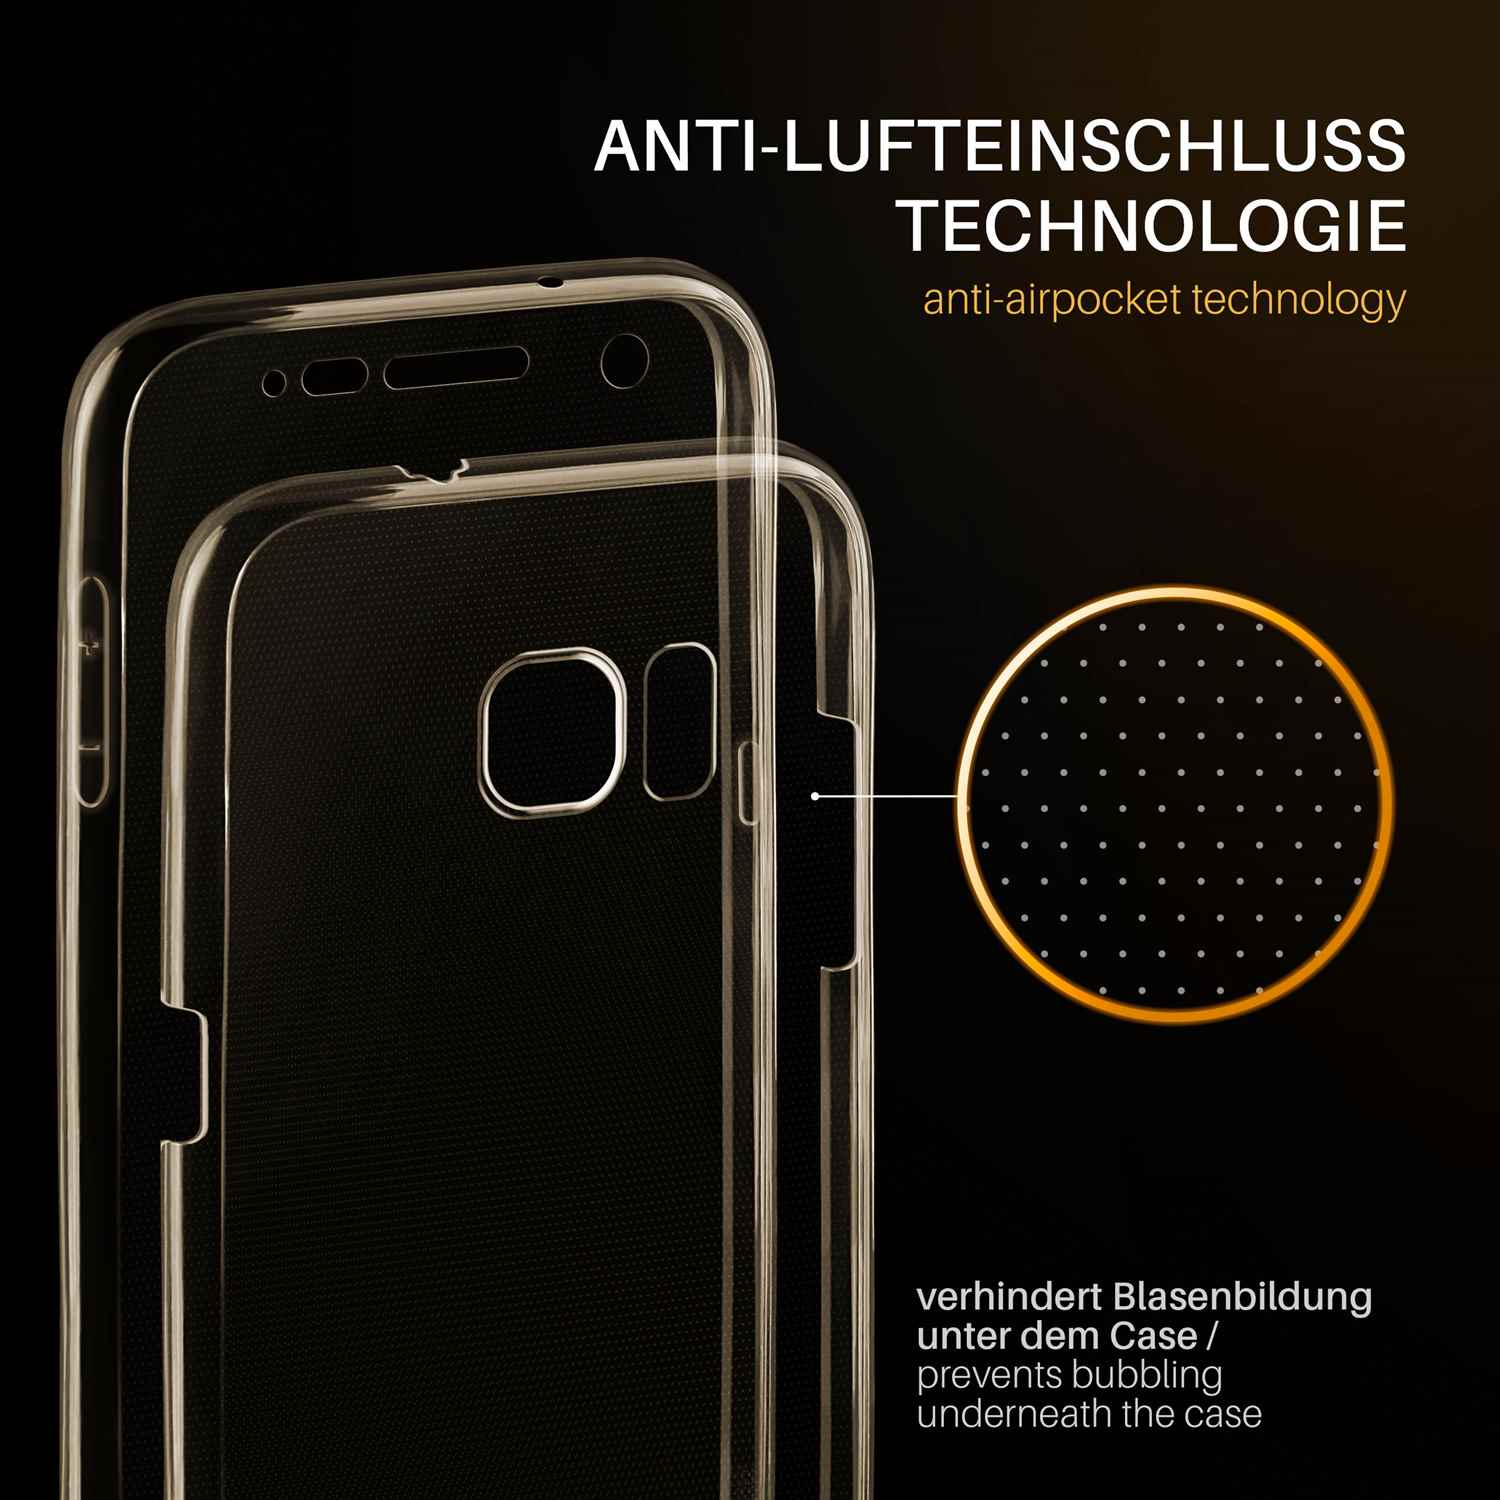 MOEX Double Case, Full Galaxy S7, Cover, Gold Samsung